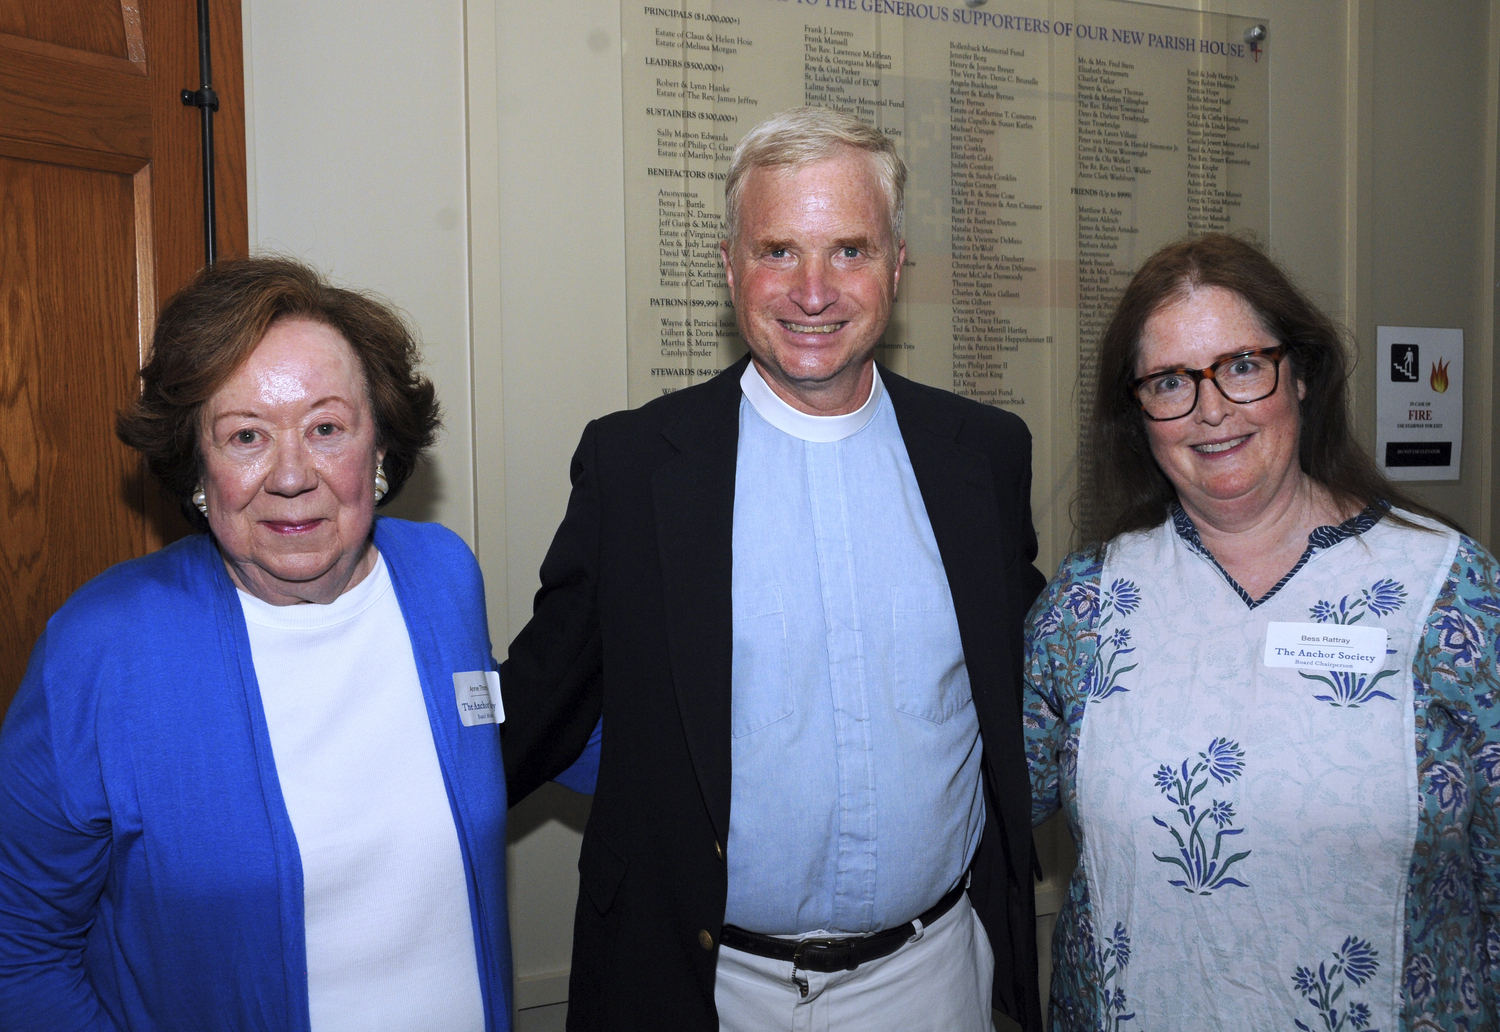 Anchor Society Board Member Anne P. Thomas,St. Luke's Church Rector Reverend Dr. Benjamin A. Shambaugh and Anchor Society Founder and Board Chair Bess Rattray at the Society's summer social at St. Luke's Episcopal Church in East Hampton on Saturday.   RICHARD LEWIN